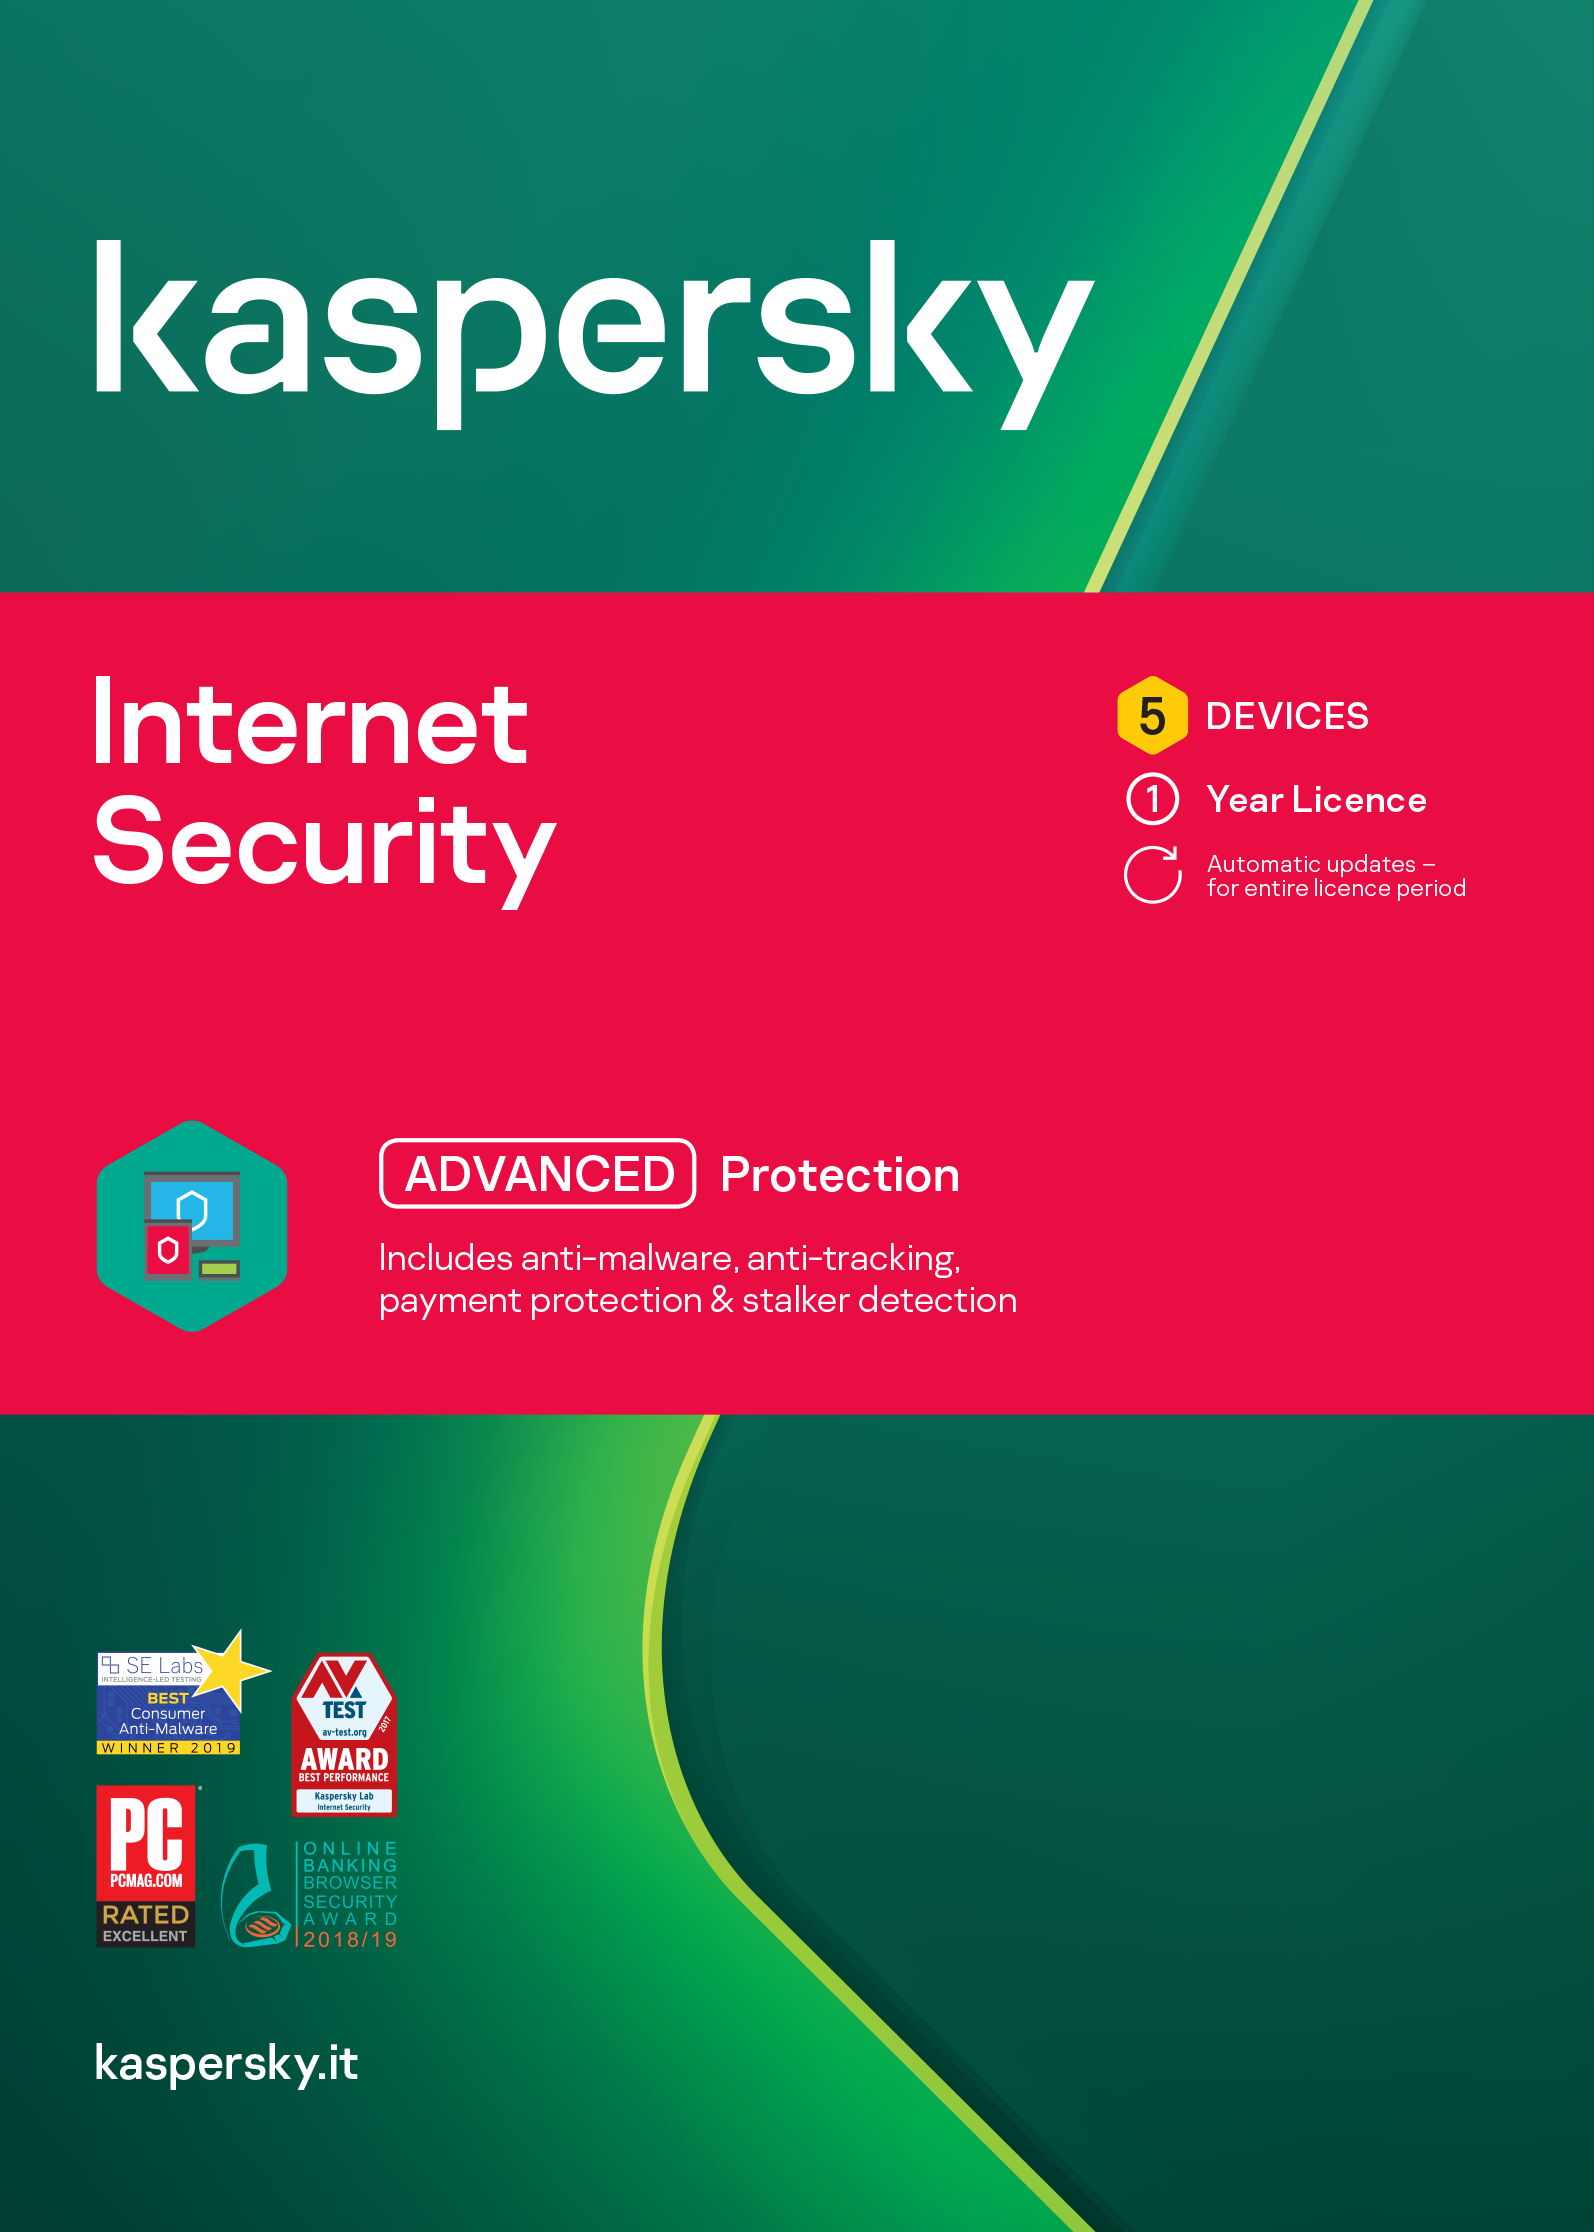 heavy election second Kaspersky Internet Security - Your online activity & privacy covered